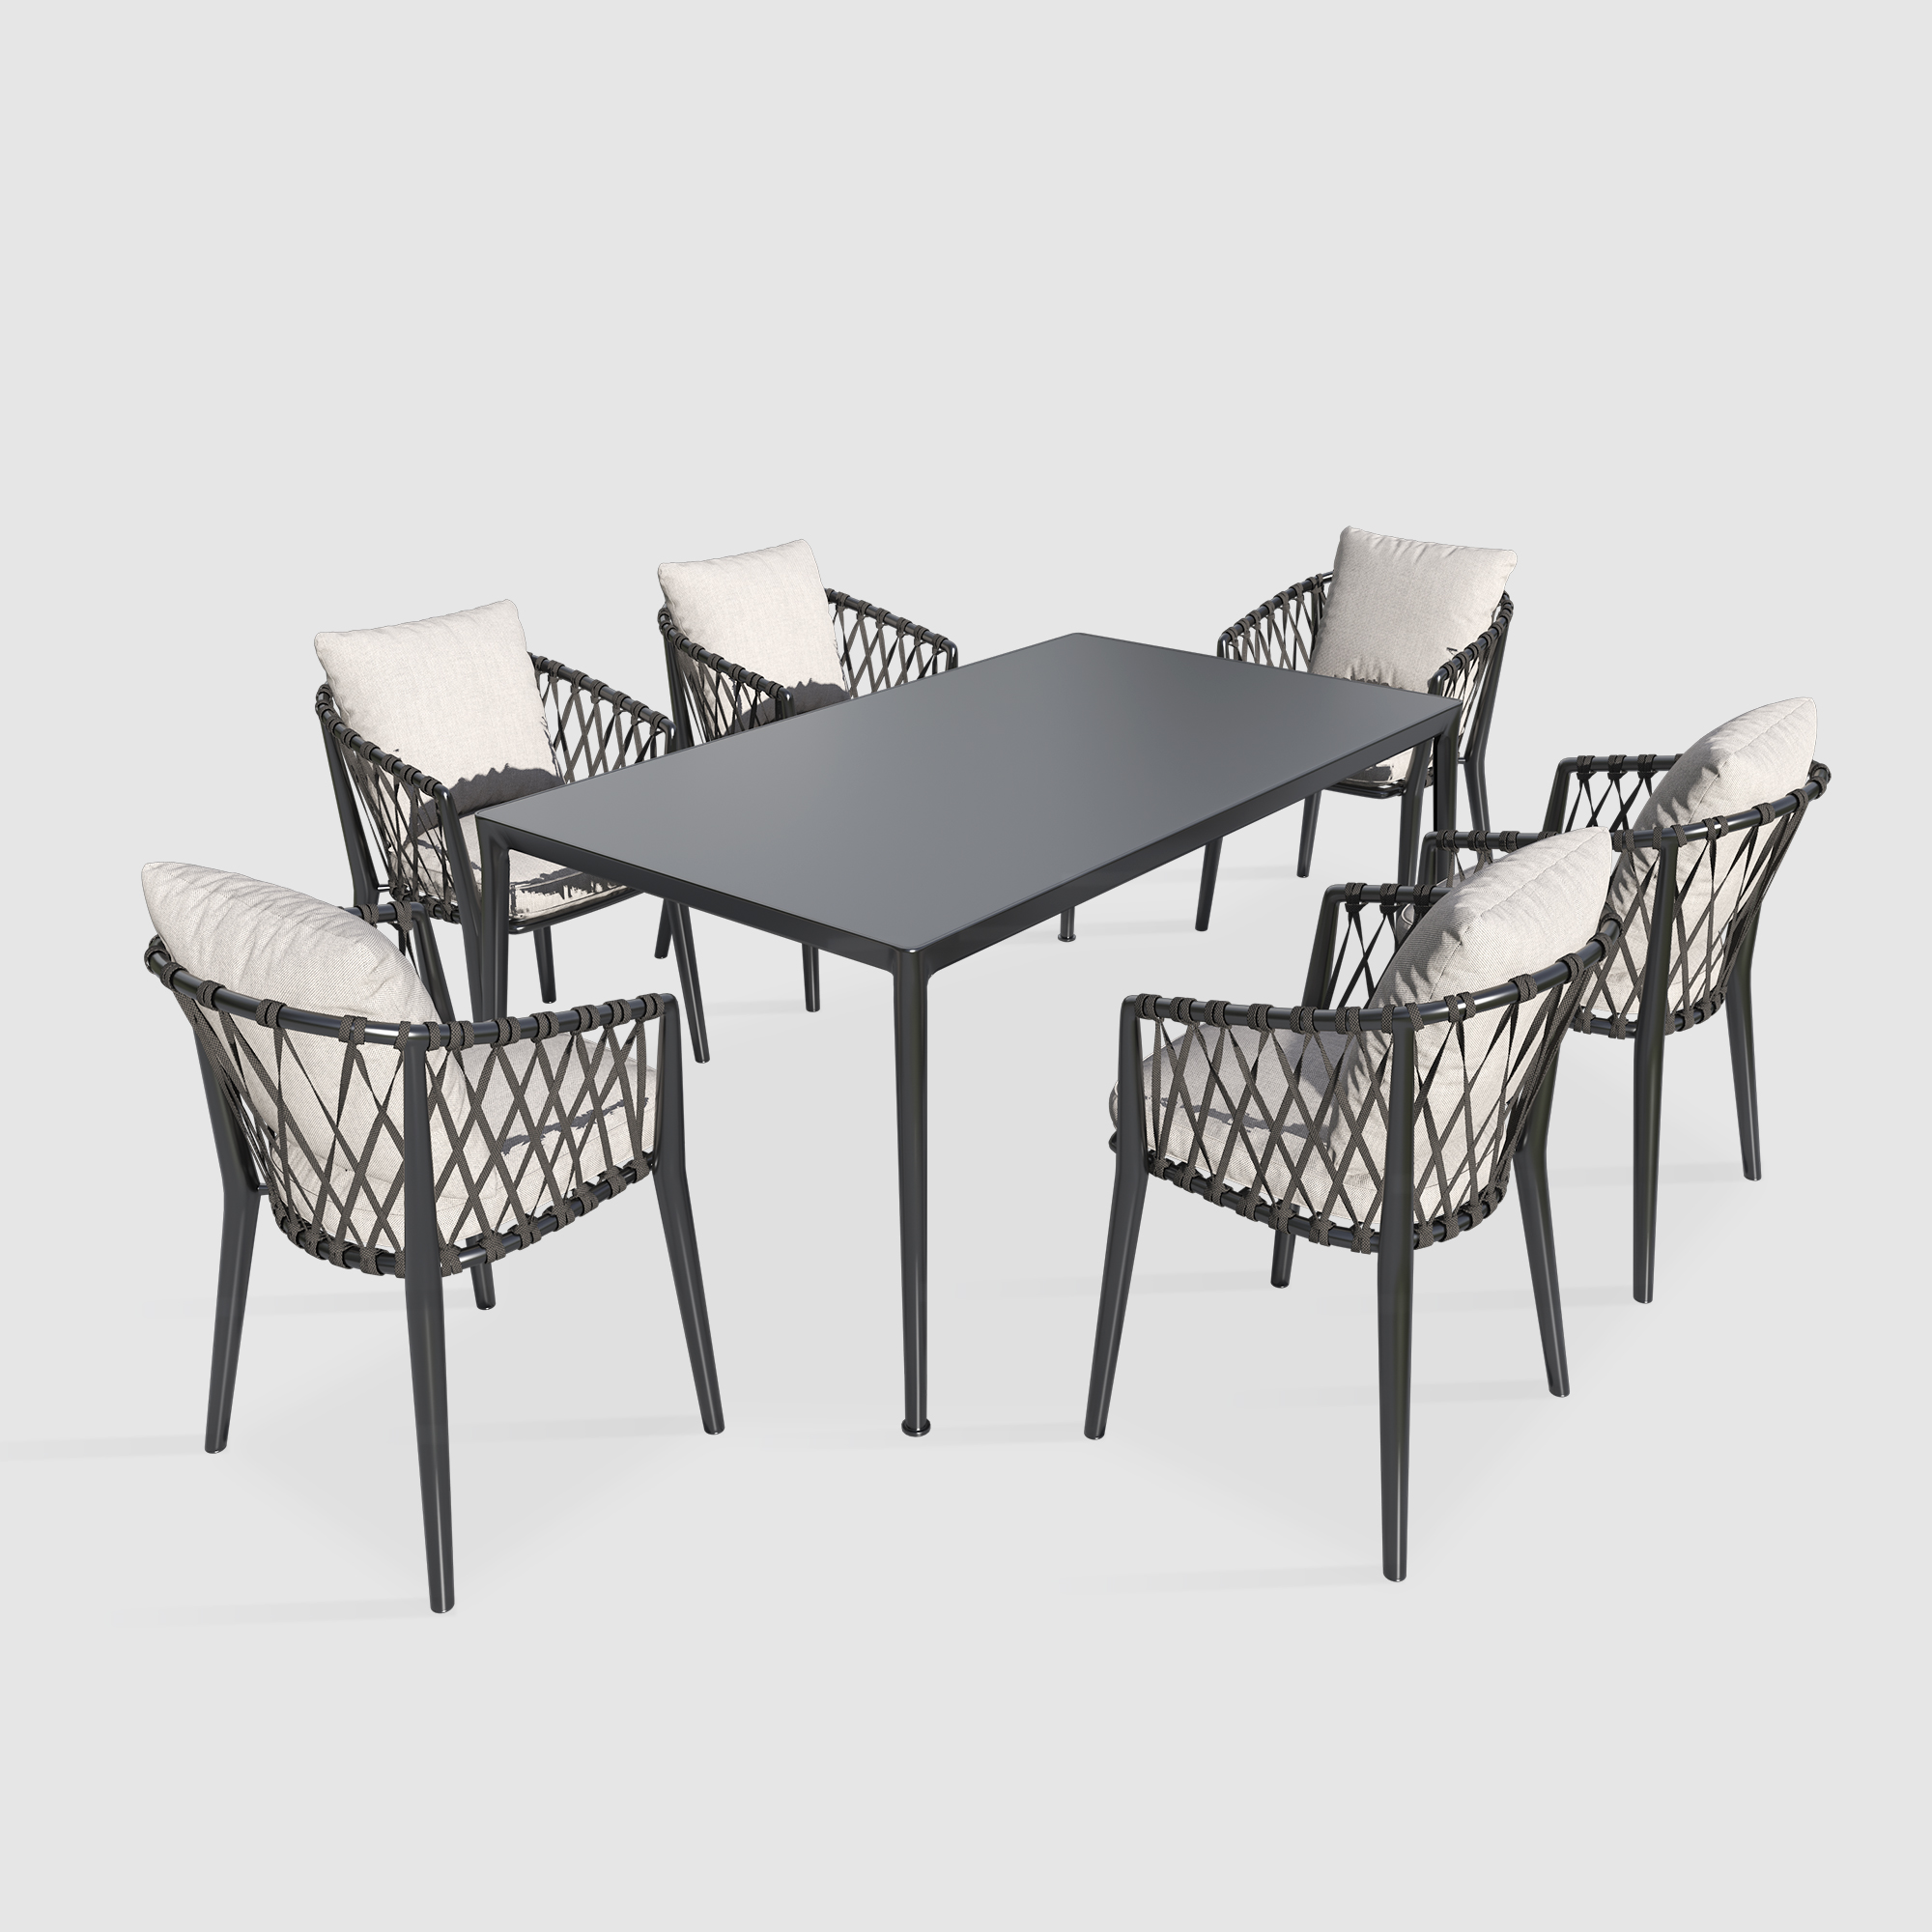 Hot Selling Outdoor Dinning Garden Dining Single Table And Chair Set Restaurant